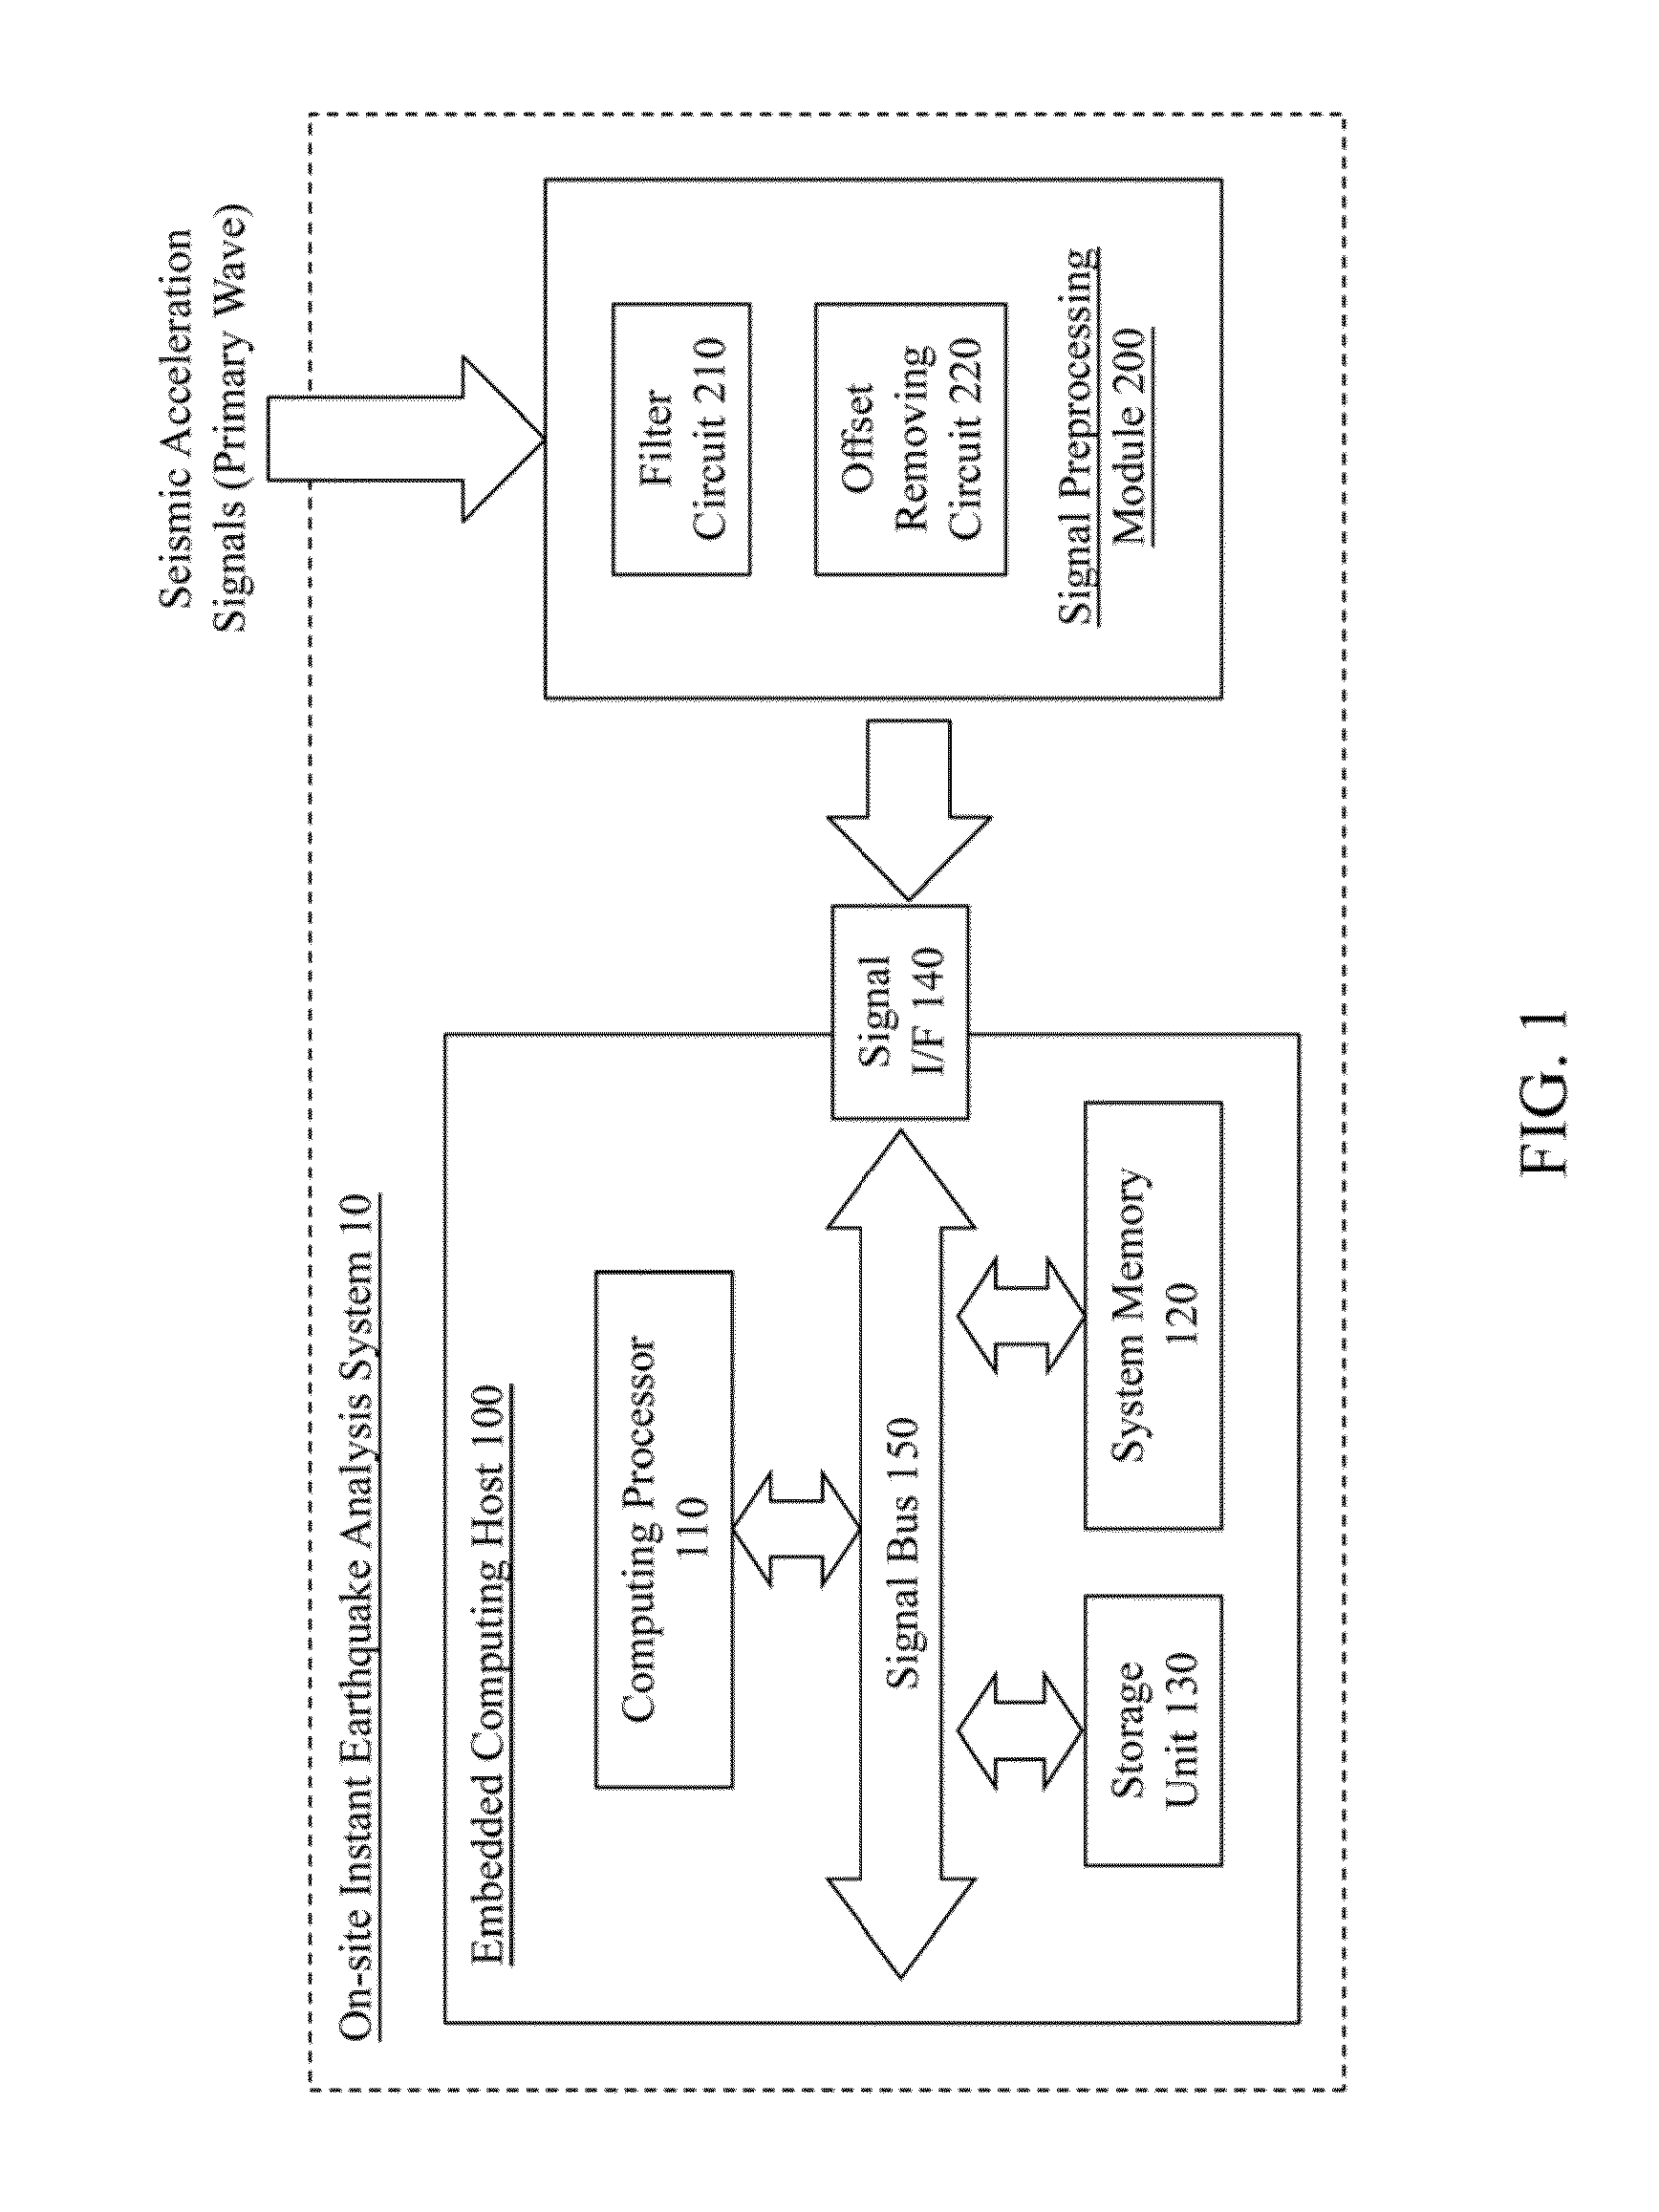 System and method for on-site instant seismic analysis